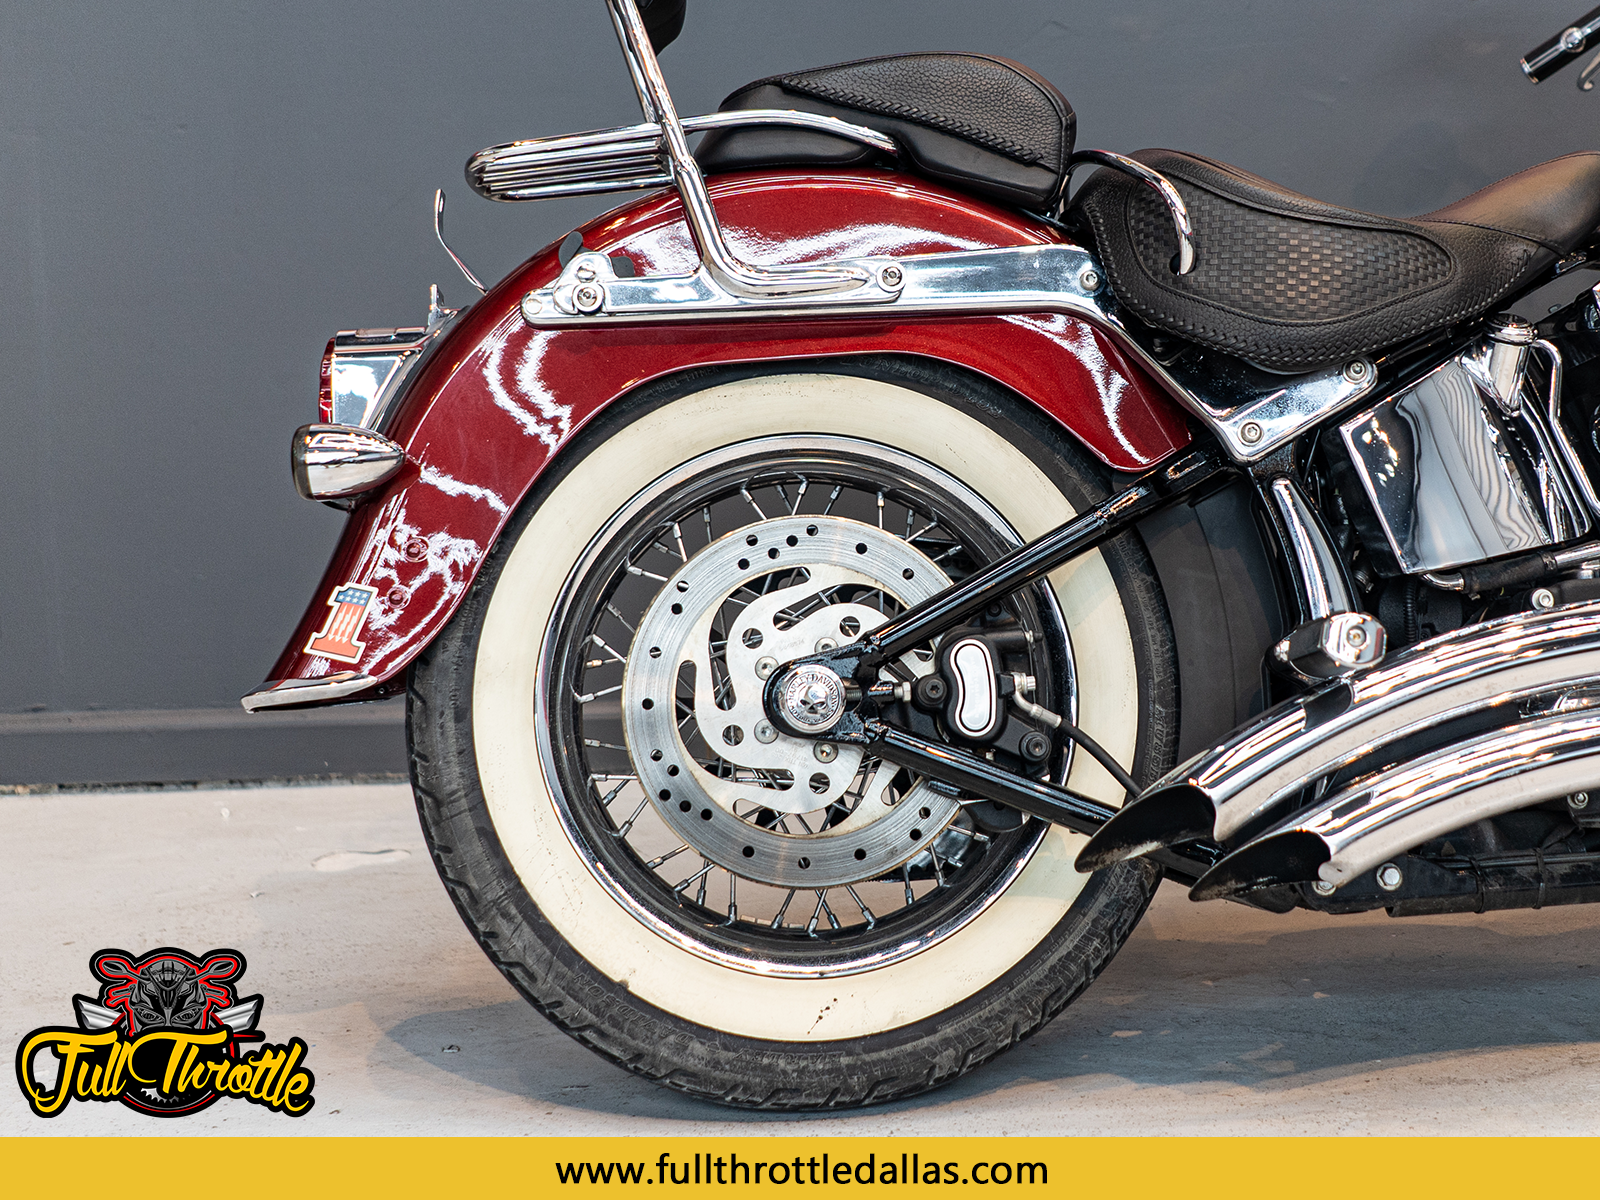 2010 Harley-Davidson Softail® Deluxe in Lancaster, Texas - Photo 21